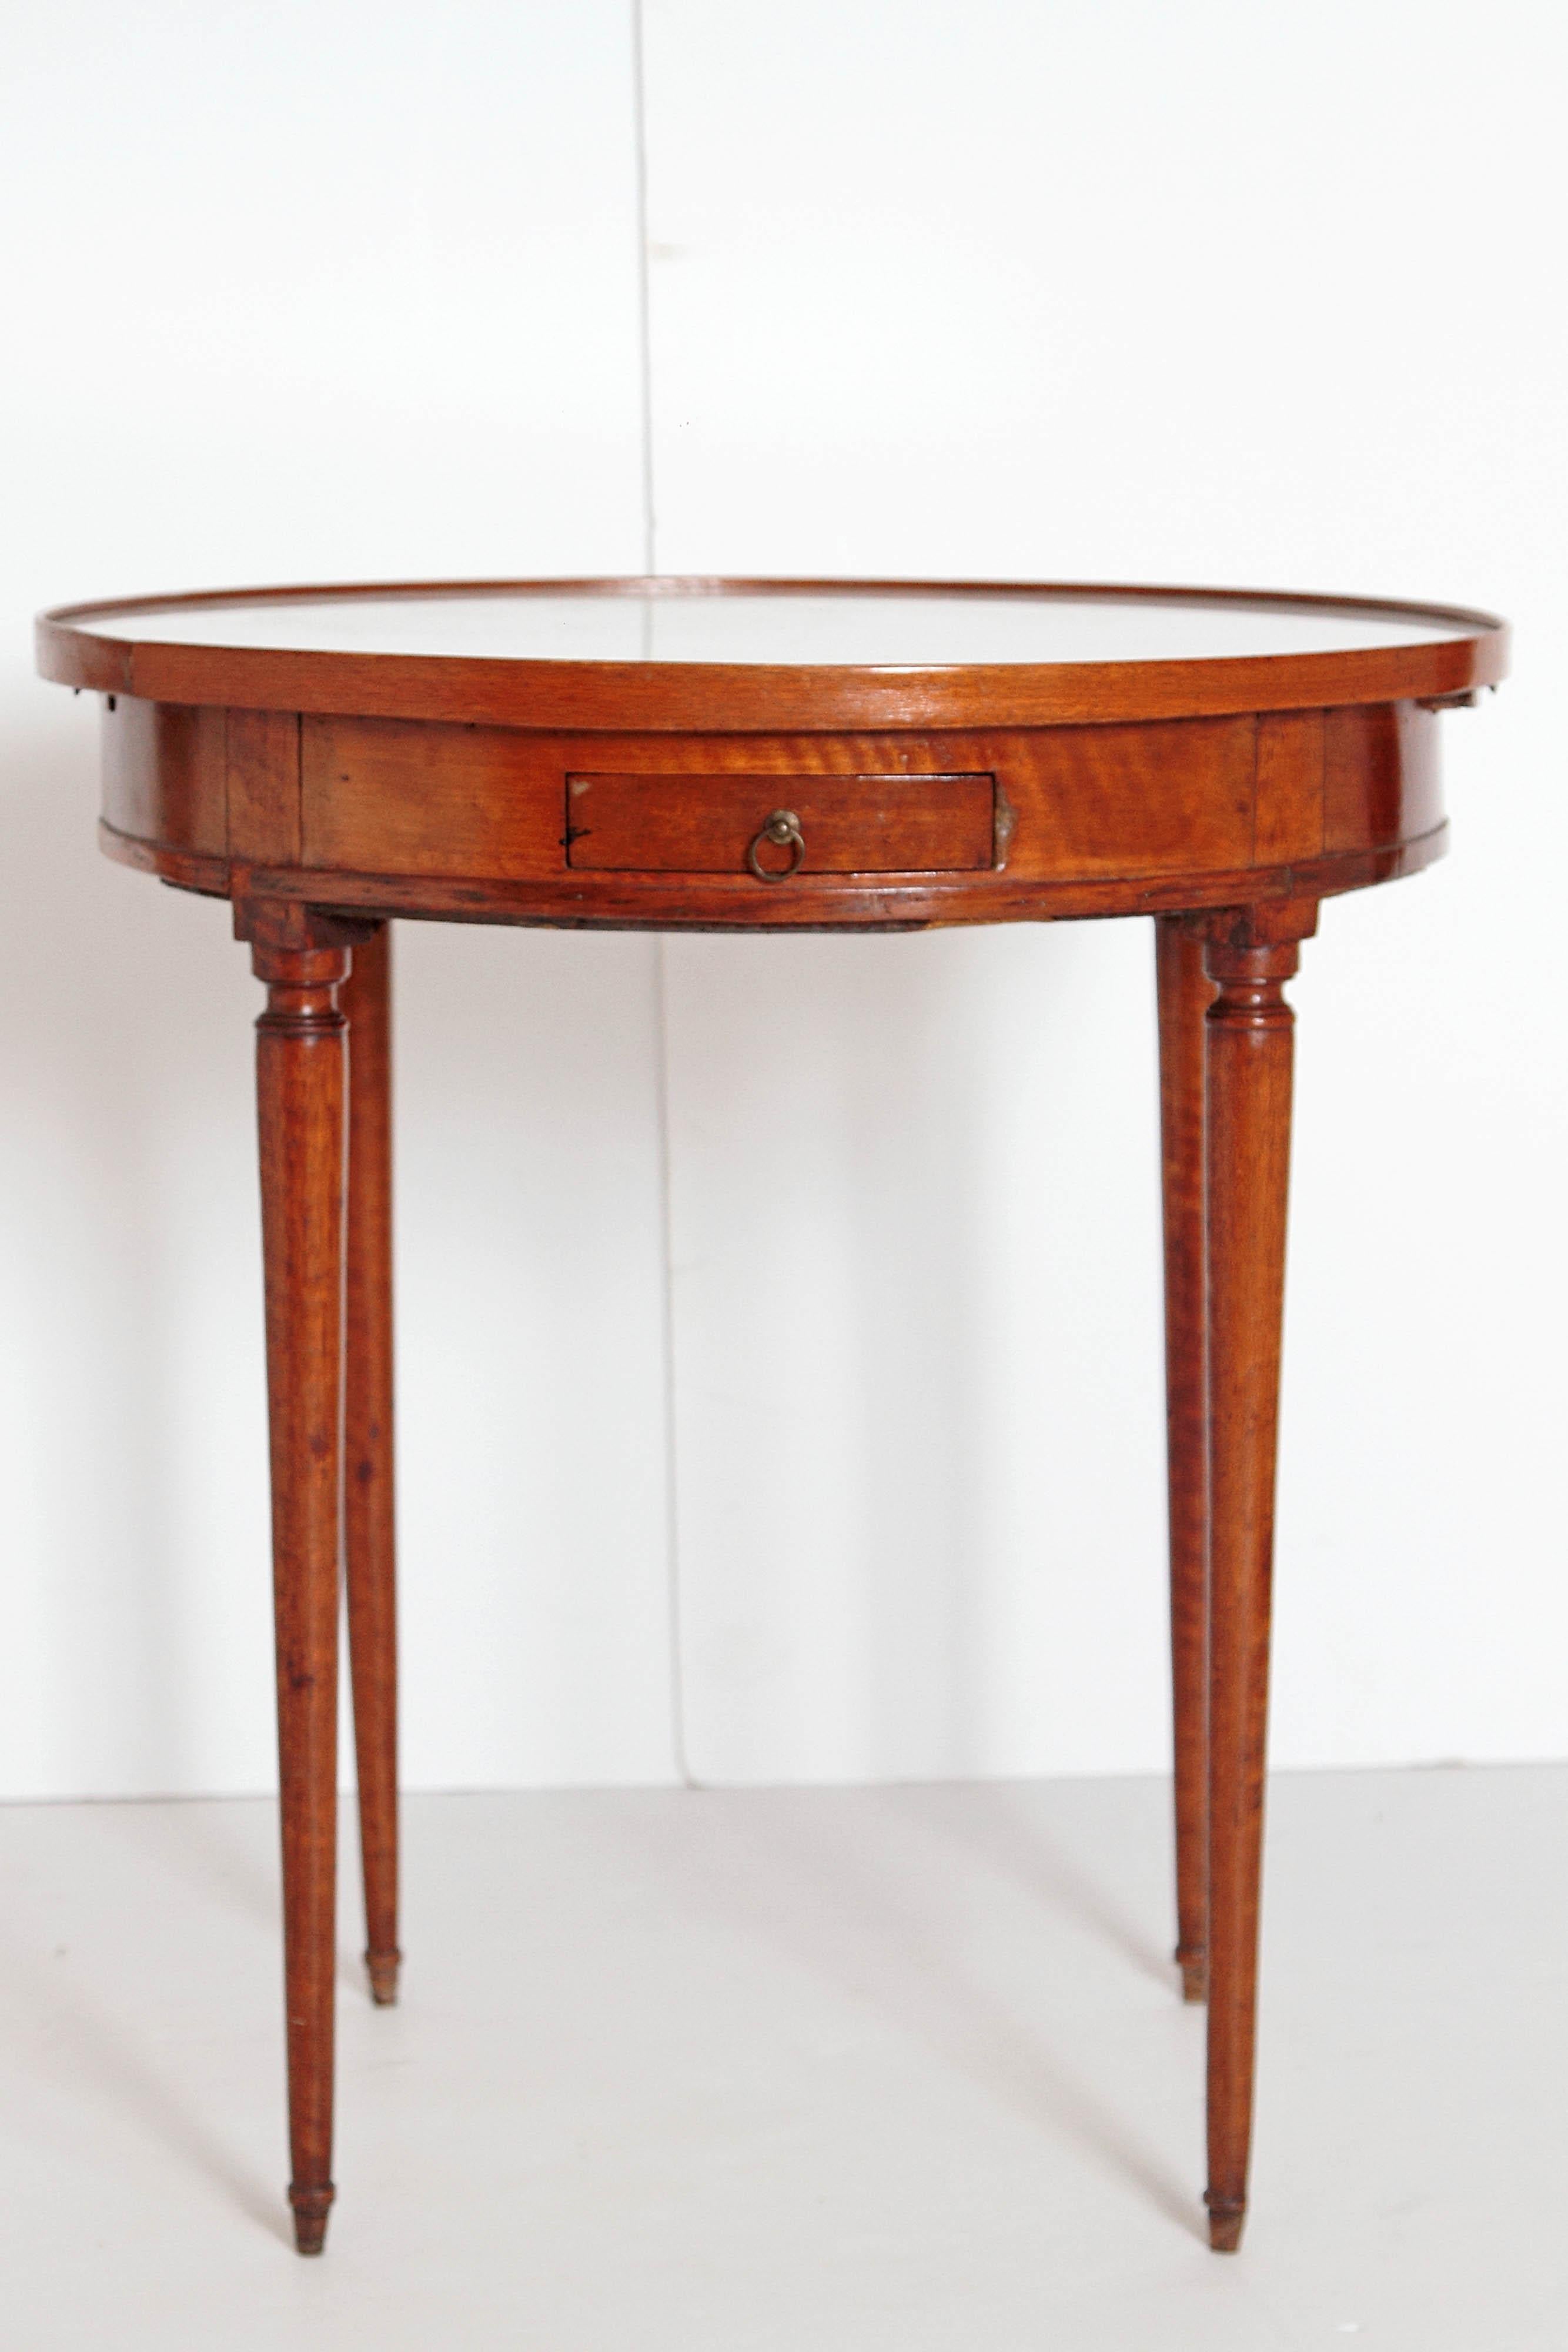 A fine quality French fruit-wood gueridon with white marble top supported on round tapered legs. There are two small drawers and two candle slides, late 19th century, France.